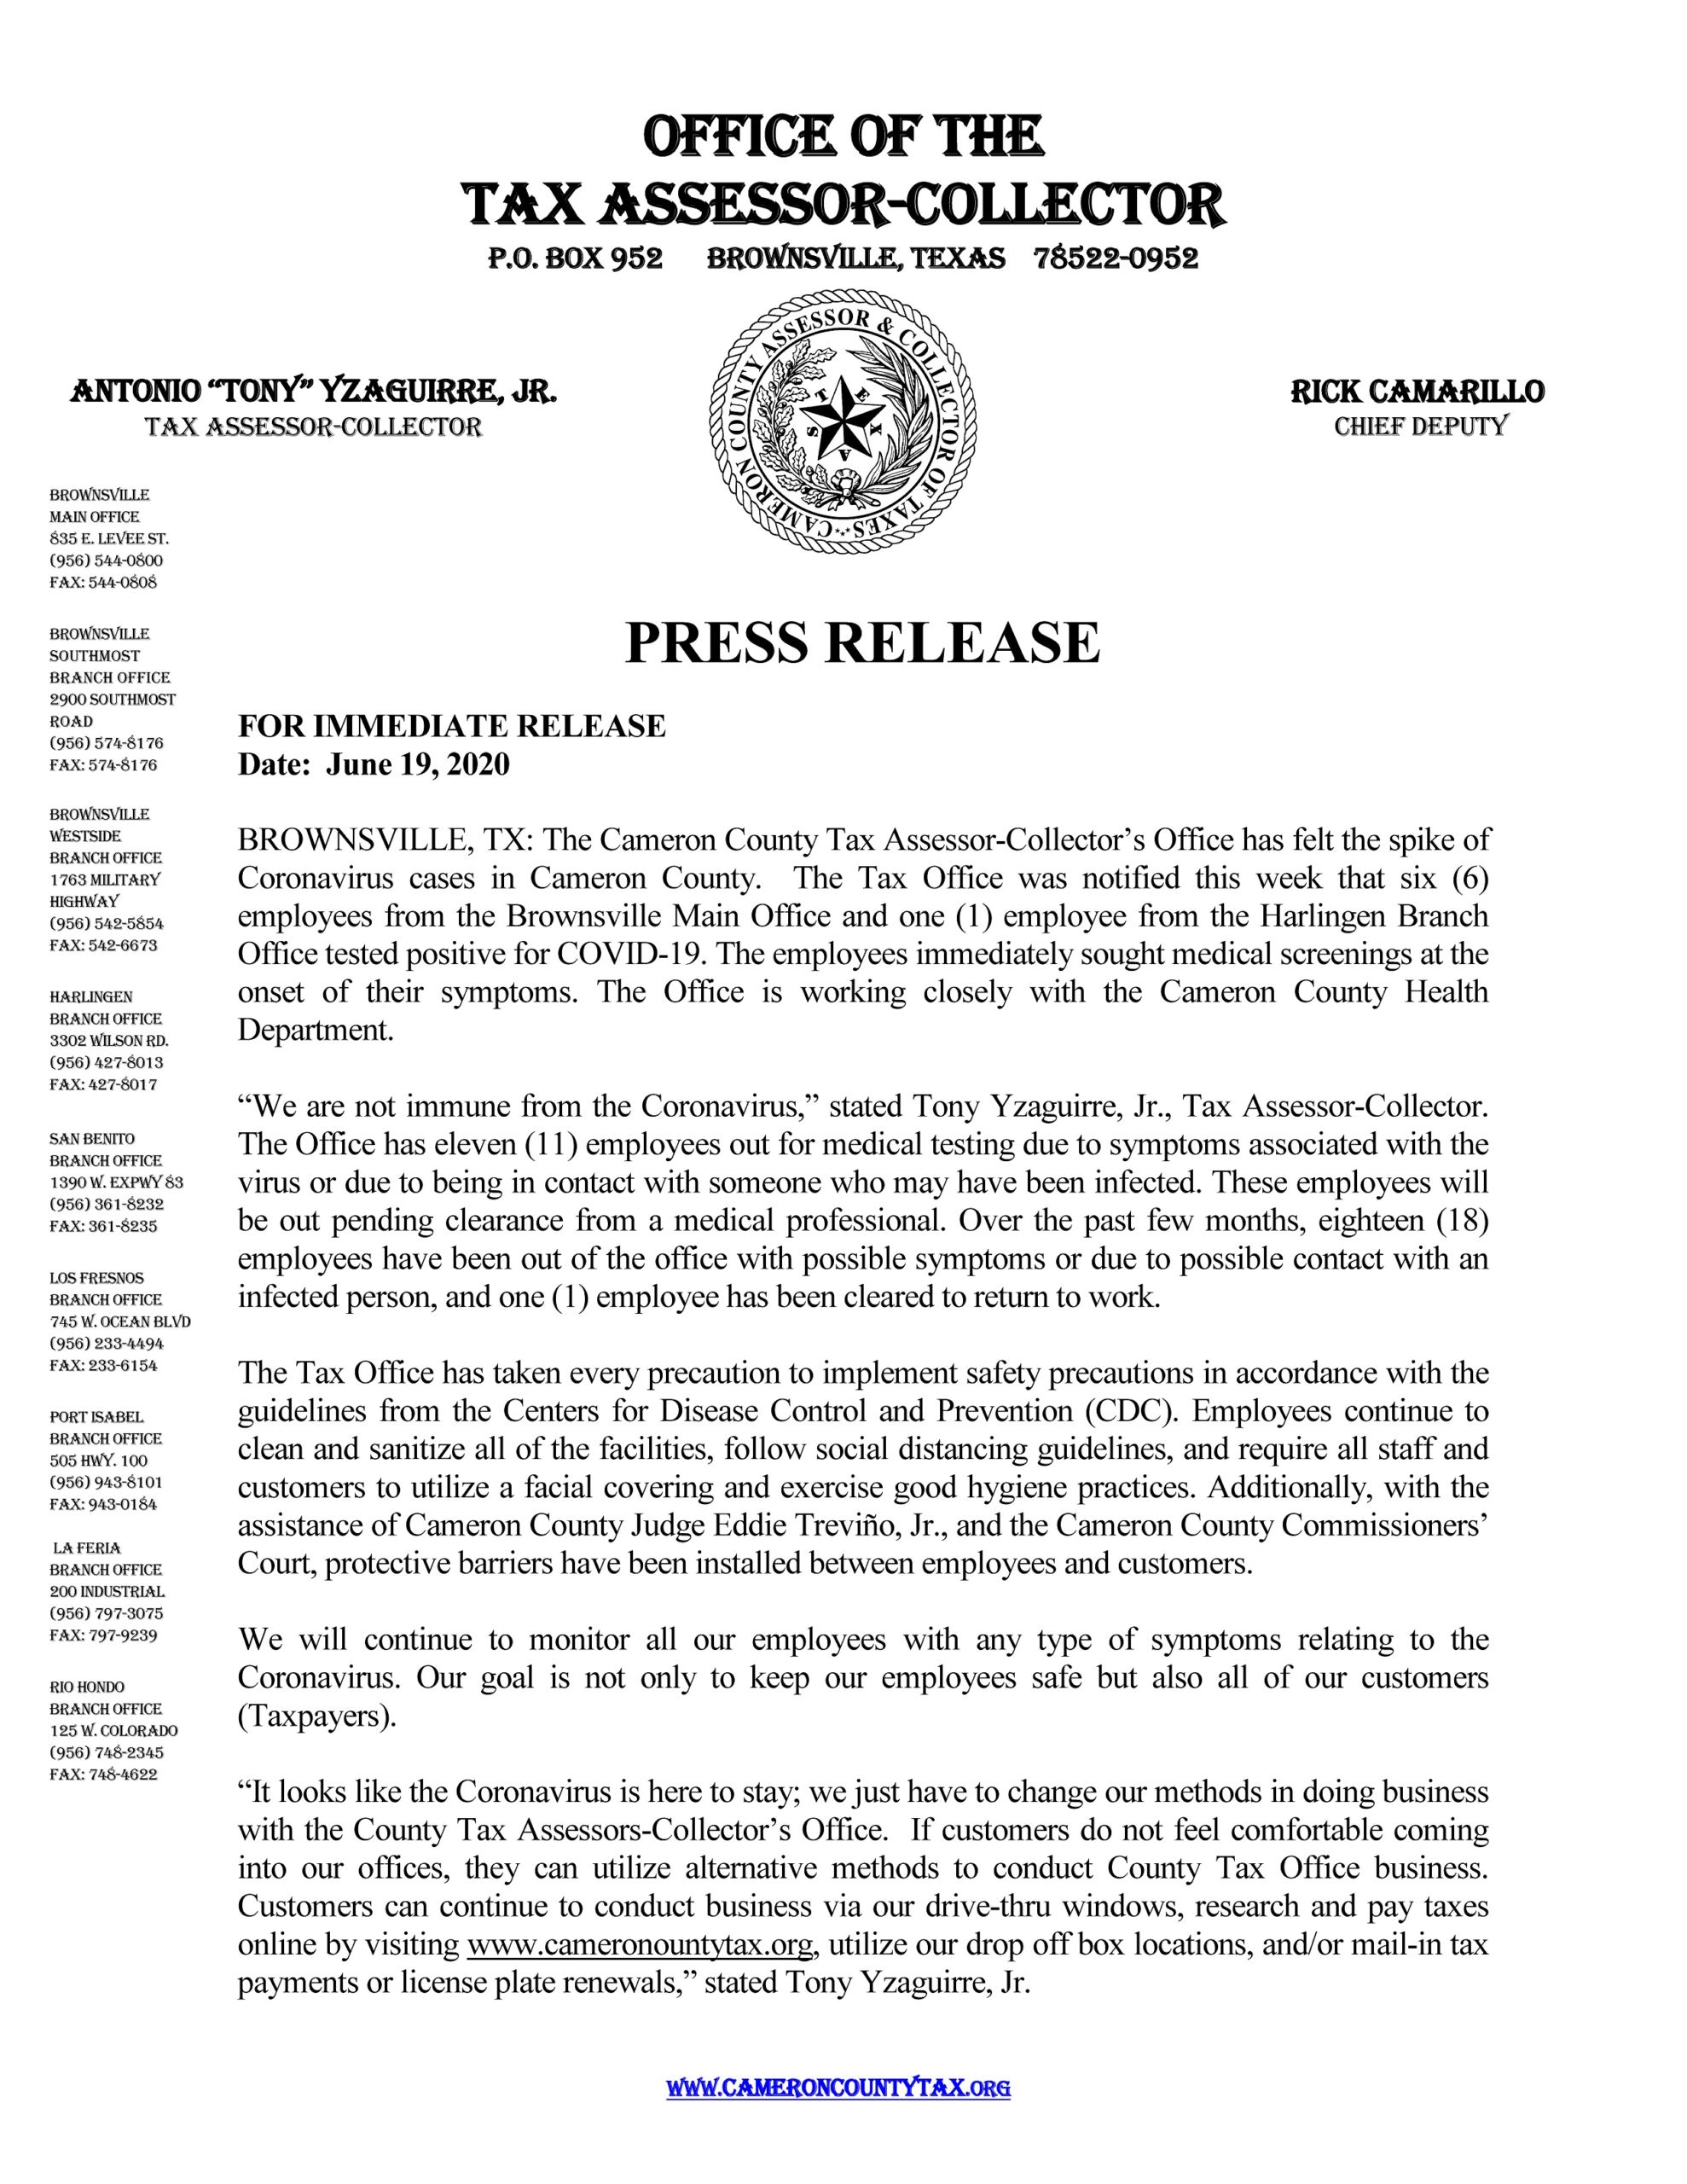 Tax Assessor Collectors Office COVIDPRESS RELEASE 2 Scaled